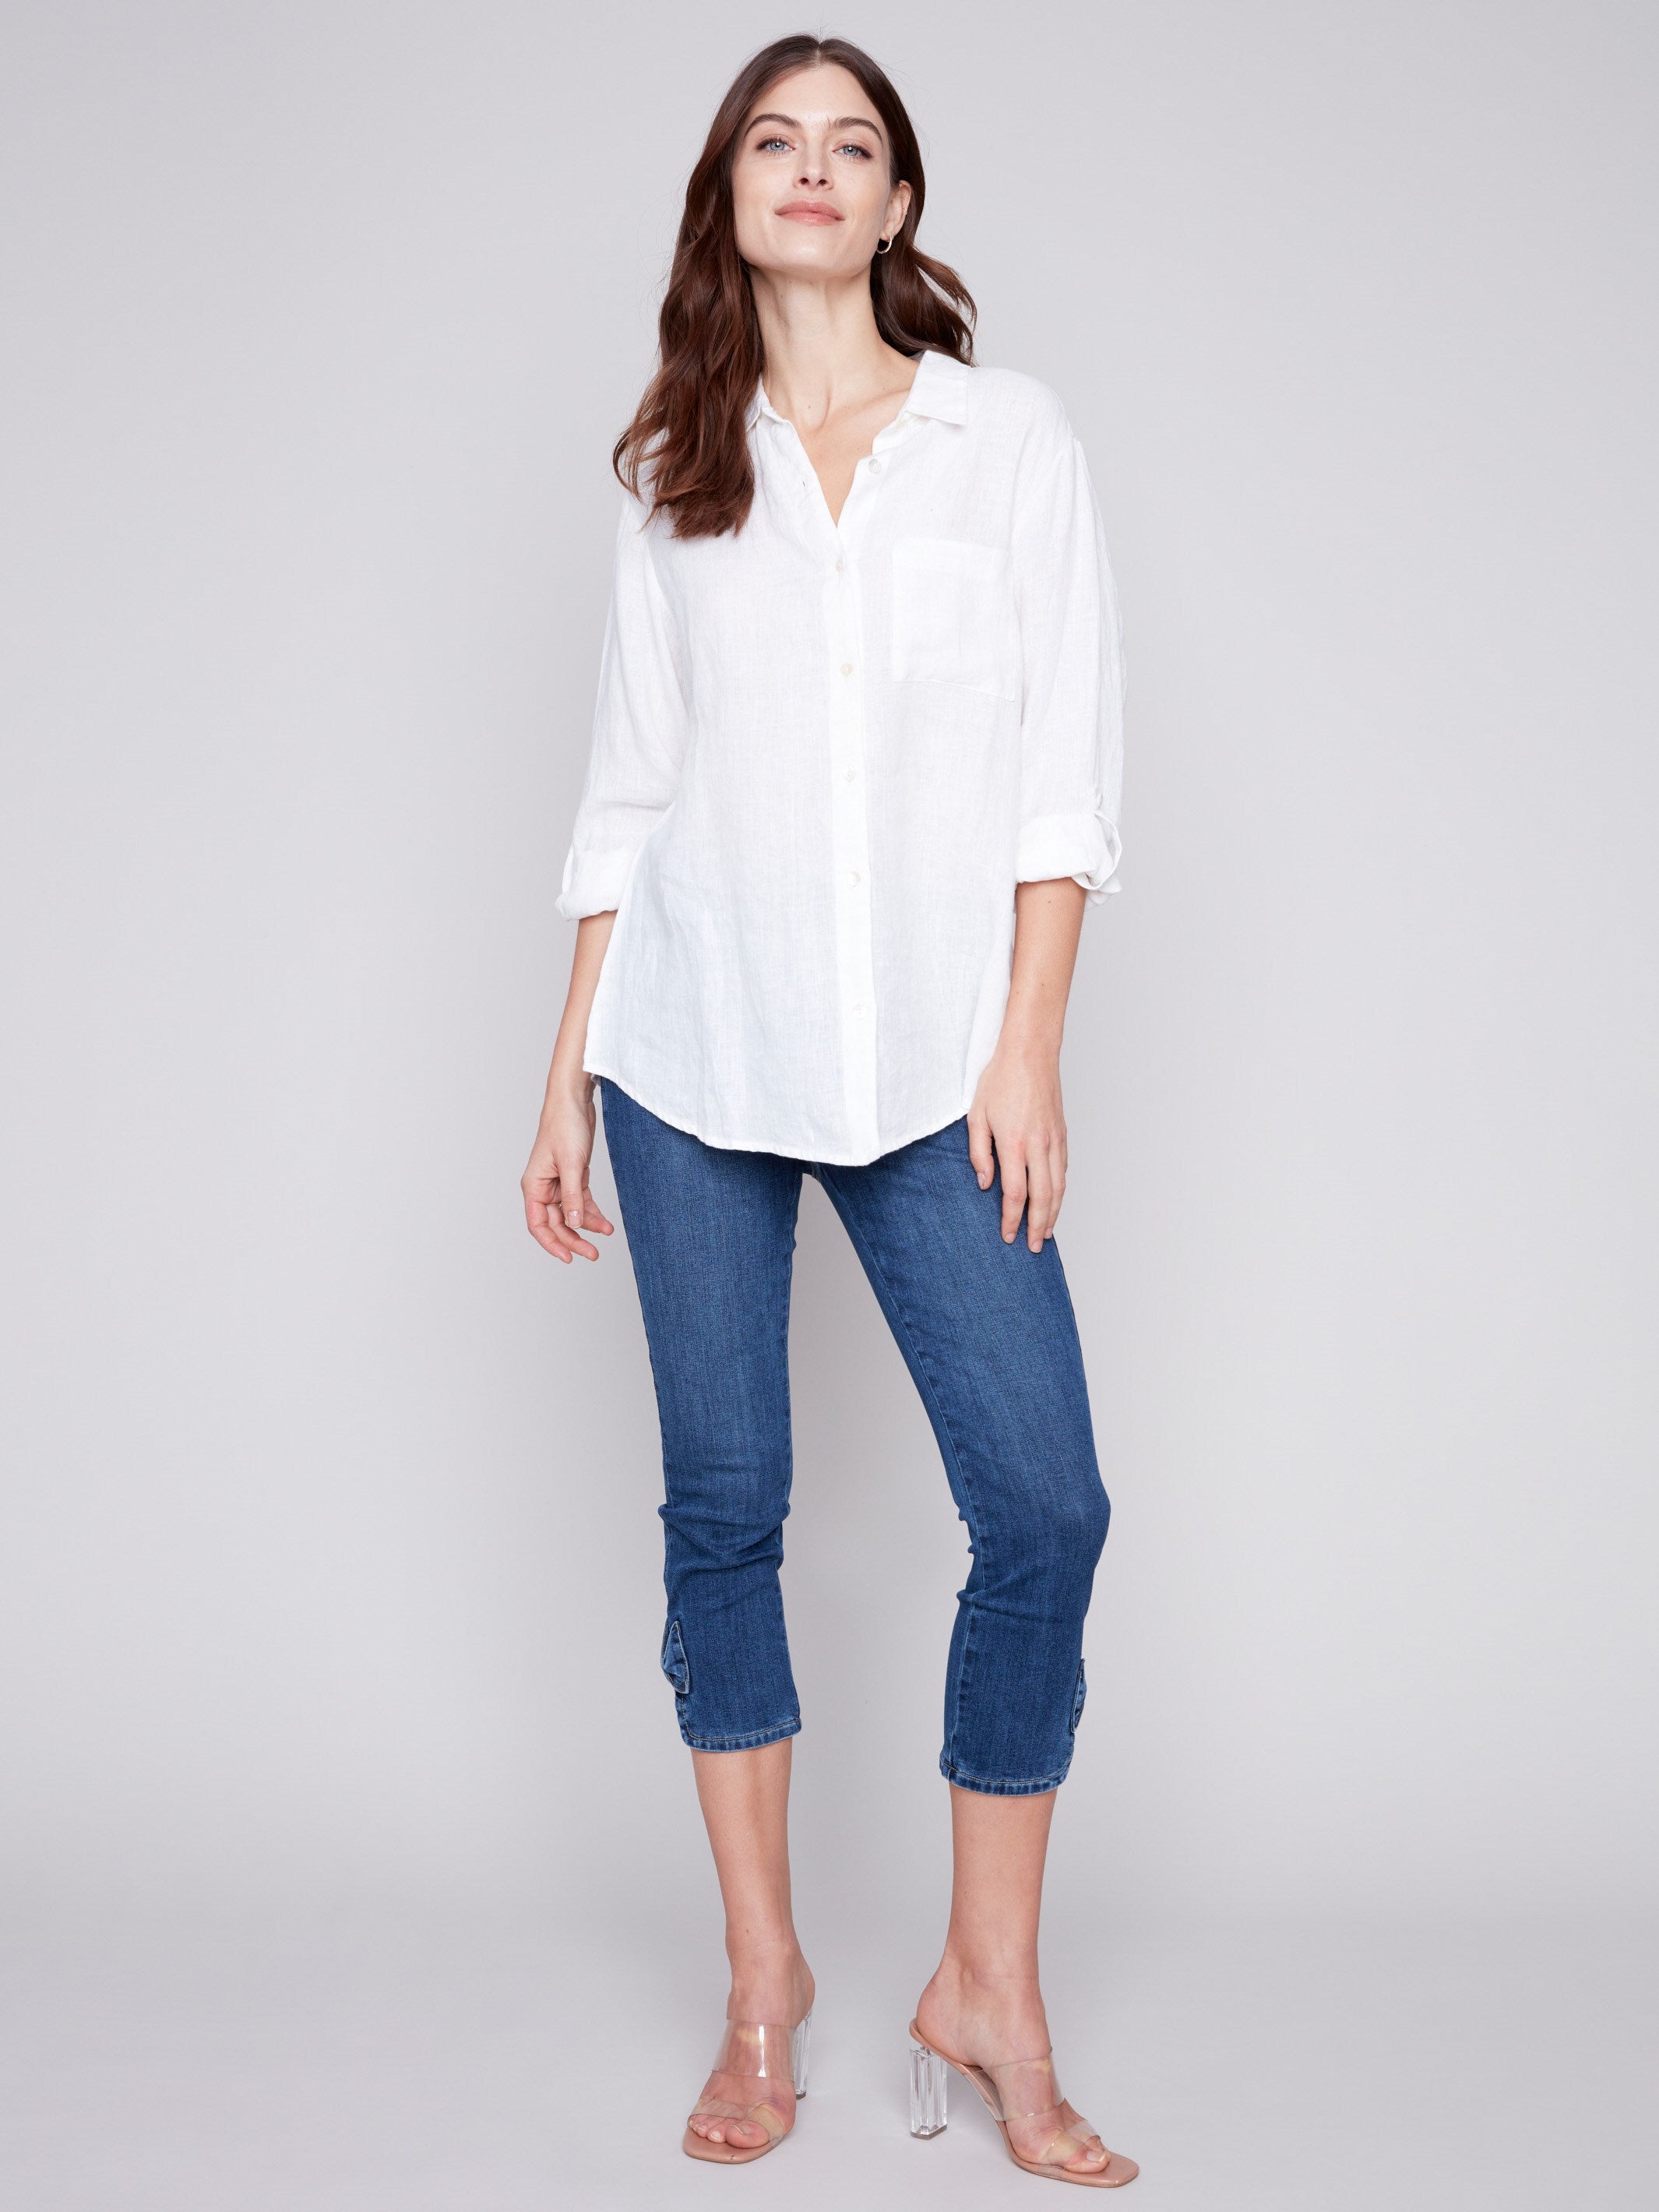 Long Linen Shirt - White - Charlie B Collection Canada - Image 3